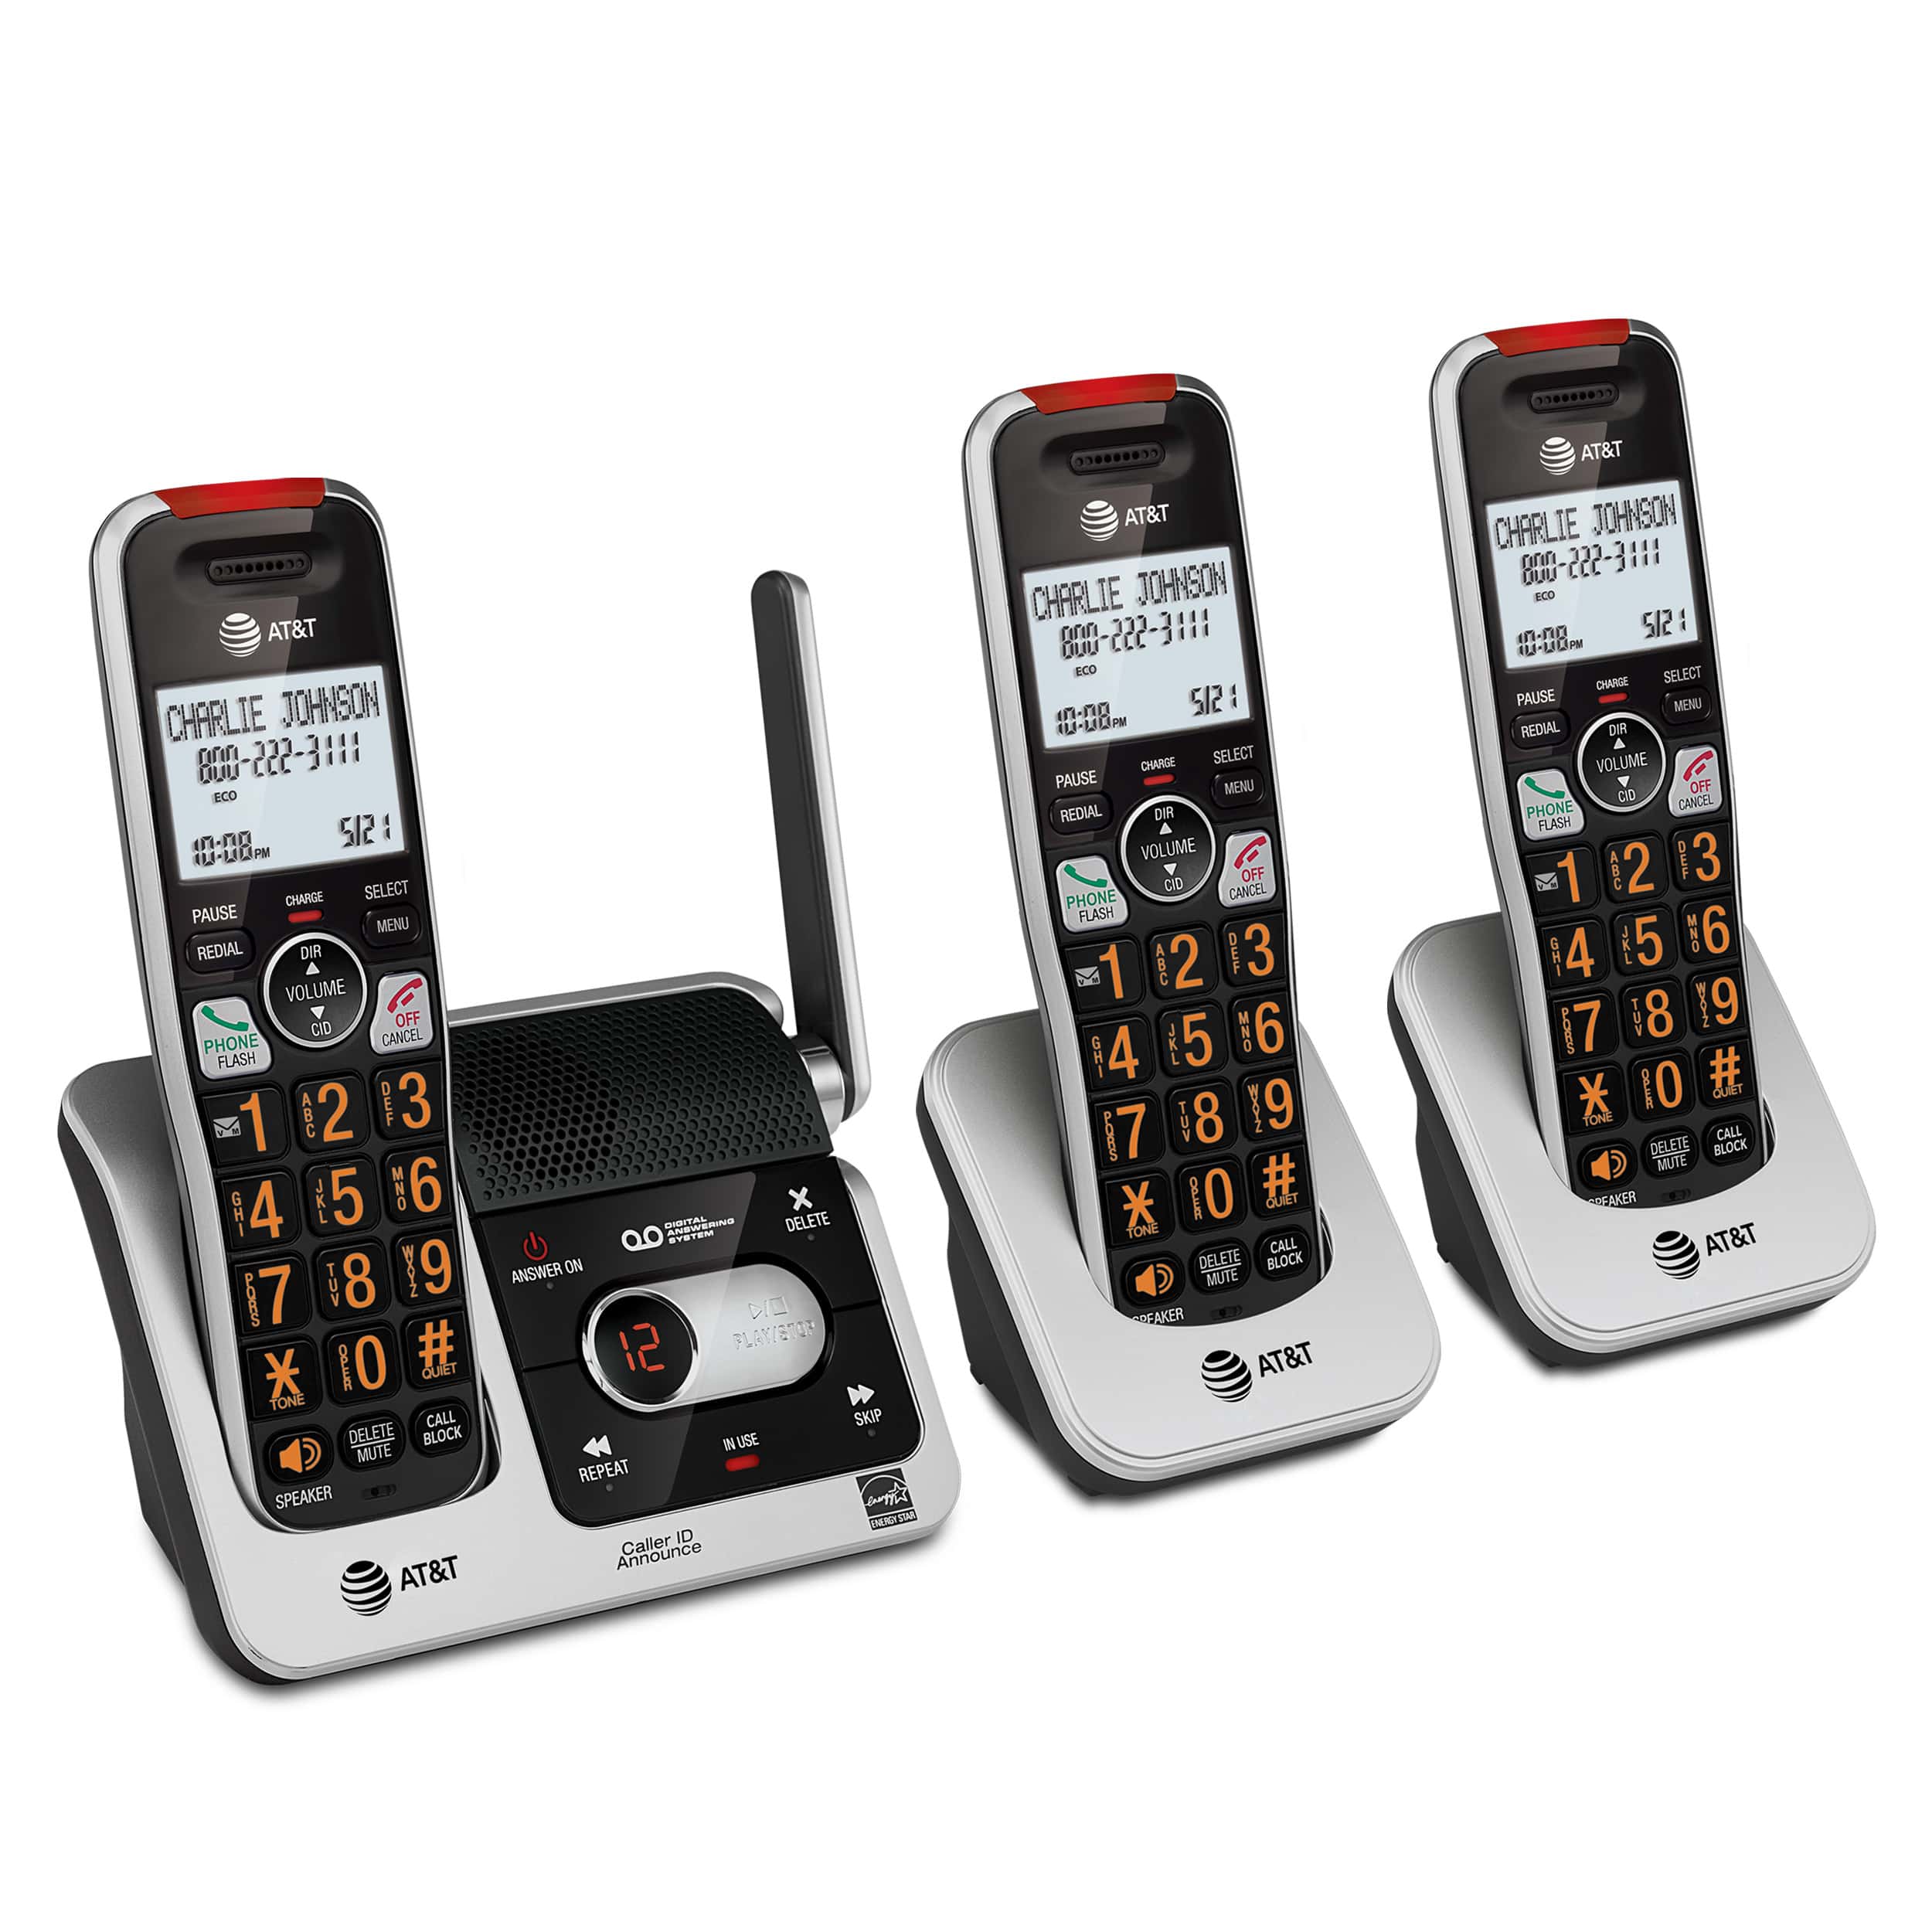 3-Handset Cordless Phone with Unsurpassed Range, Smart Call Blocker and Answering System - view 9